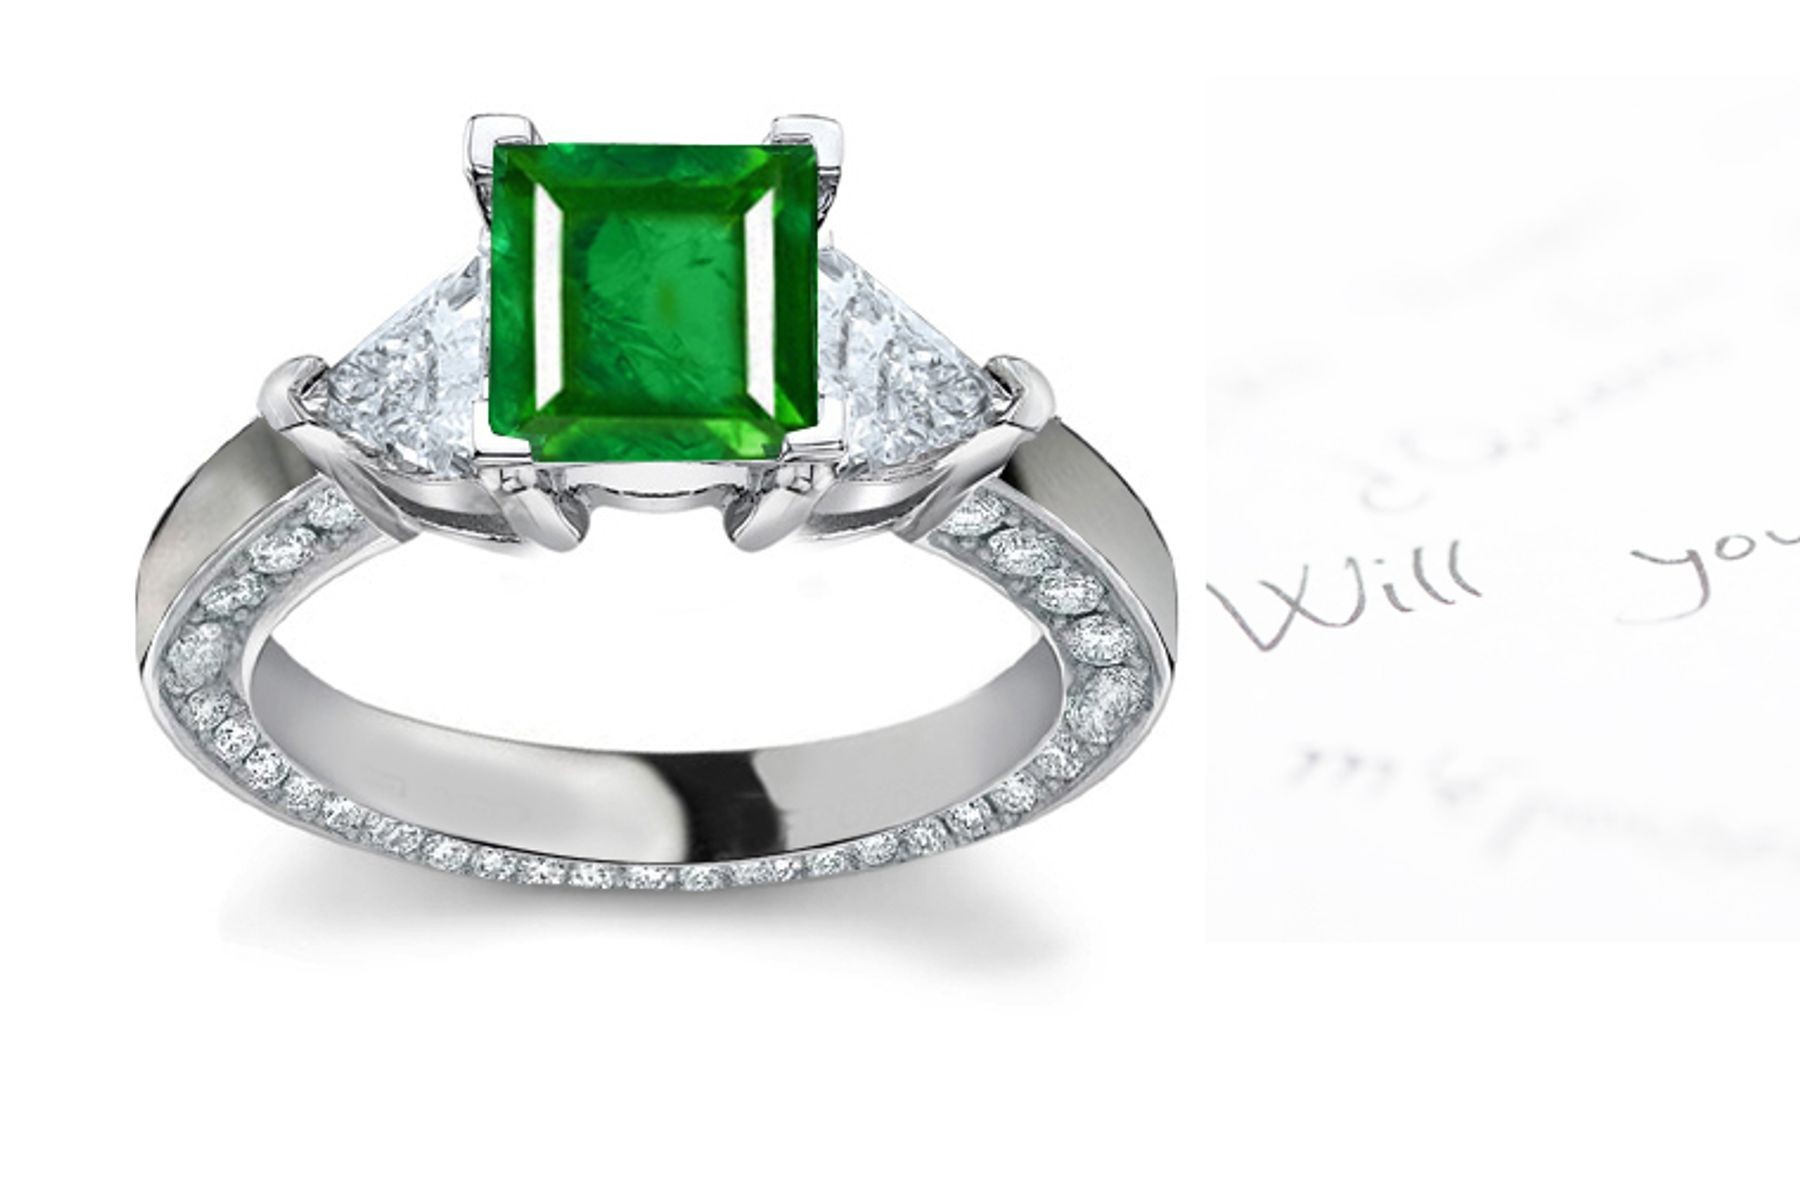 A Large Varying Assortment: A Square Emerald & Trillion 3-Stone Diamond & Platinum Halo Ring in 14k Rose Gold View Sides